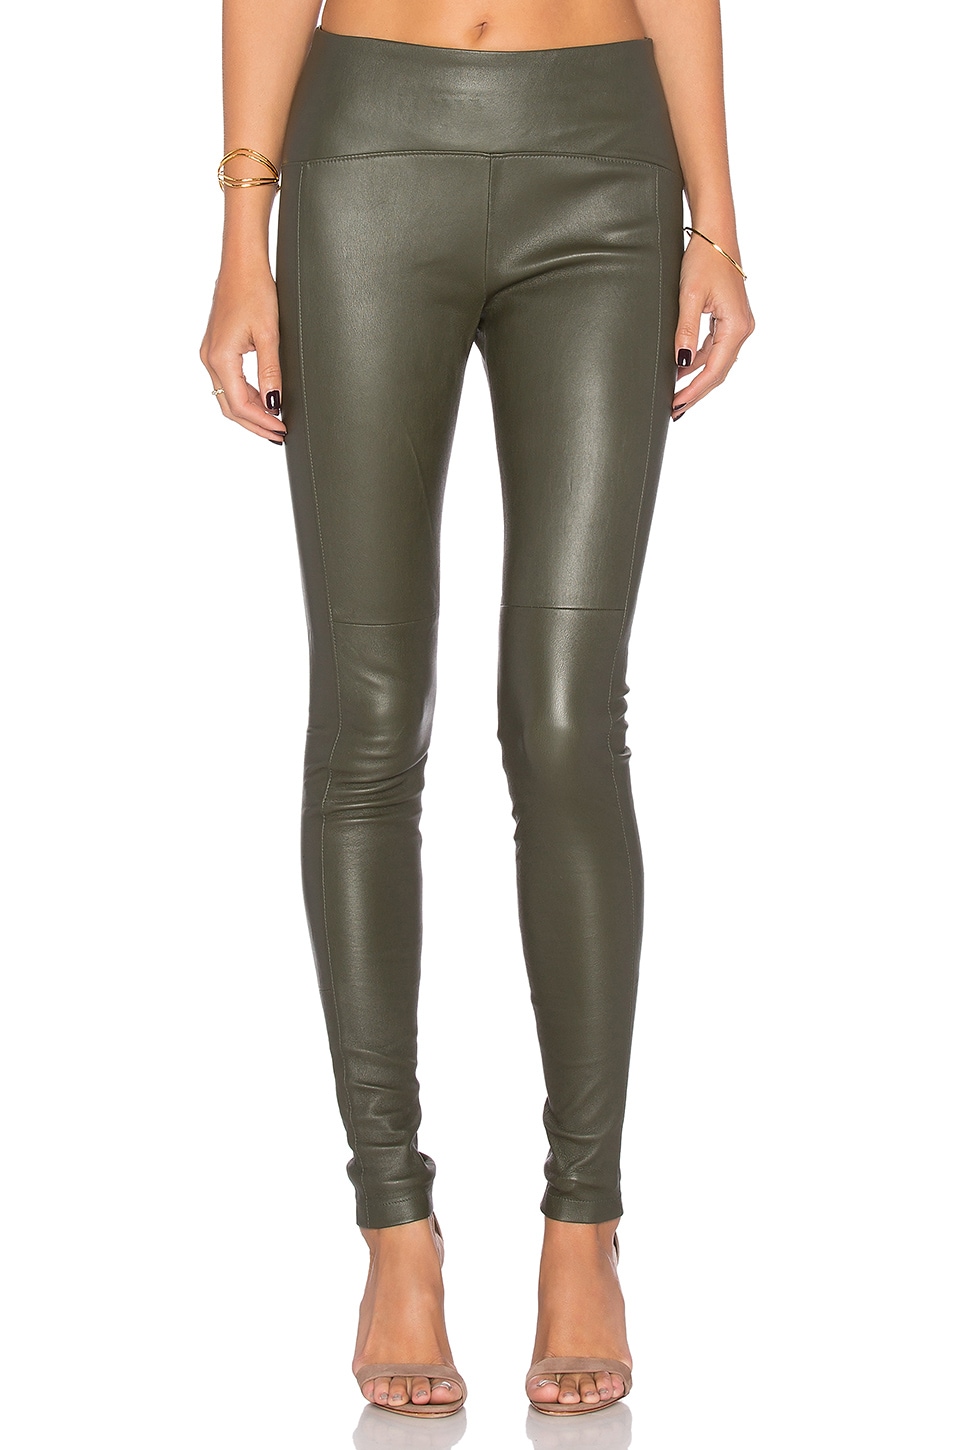 olive green leather pants